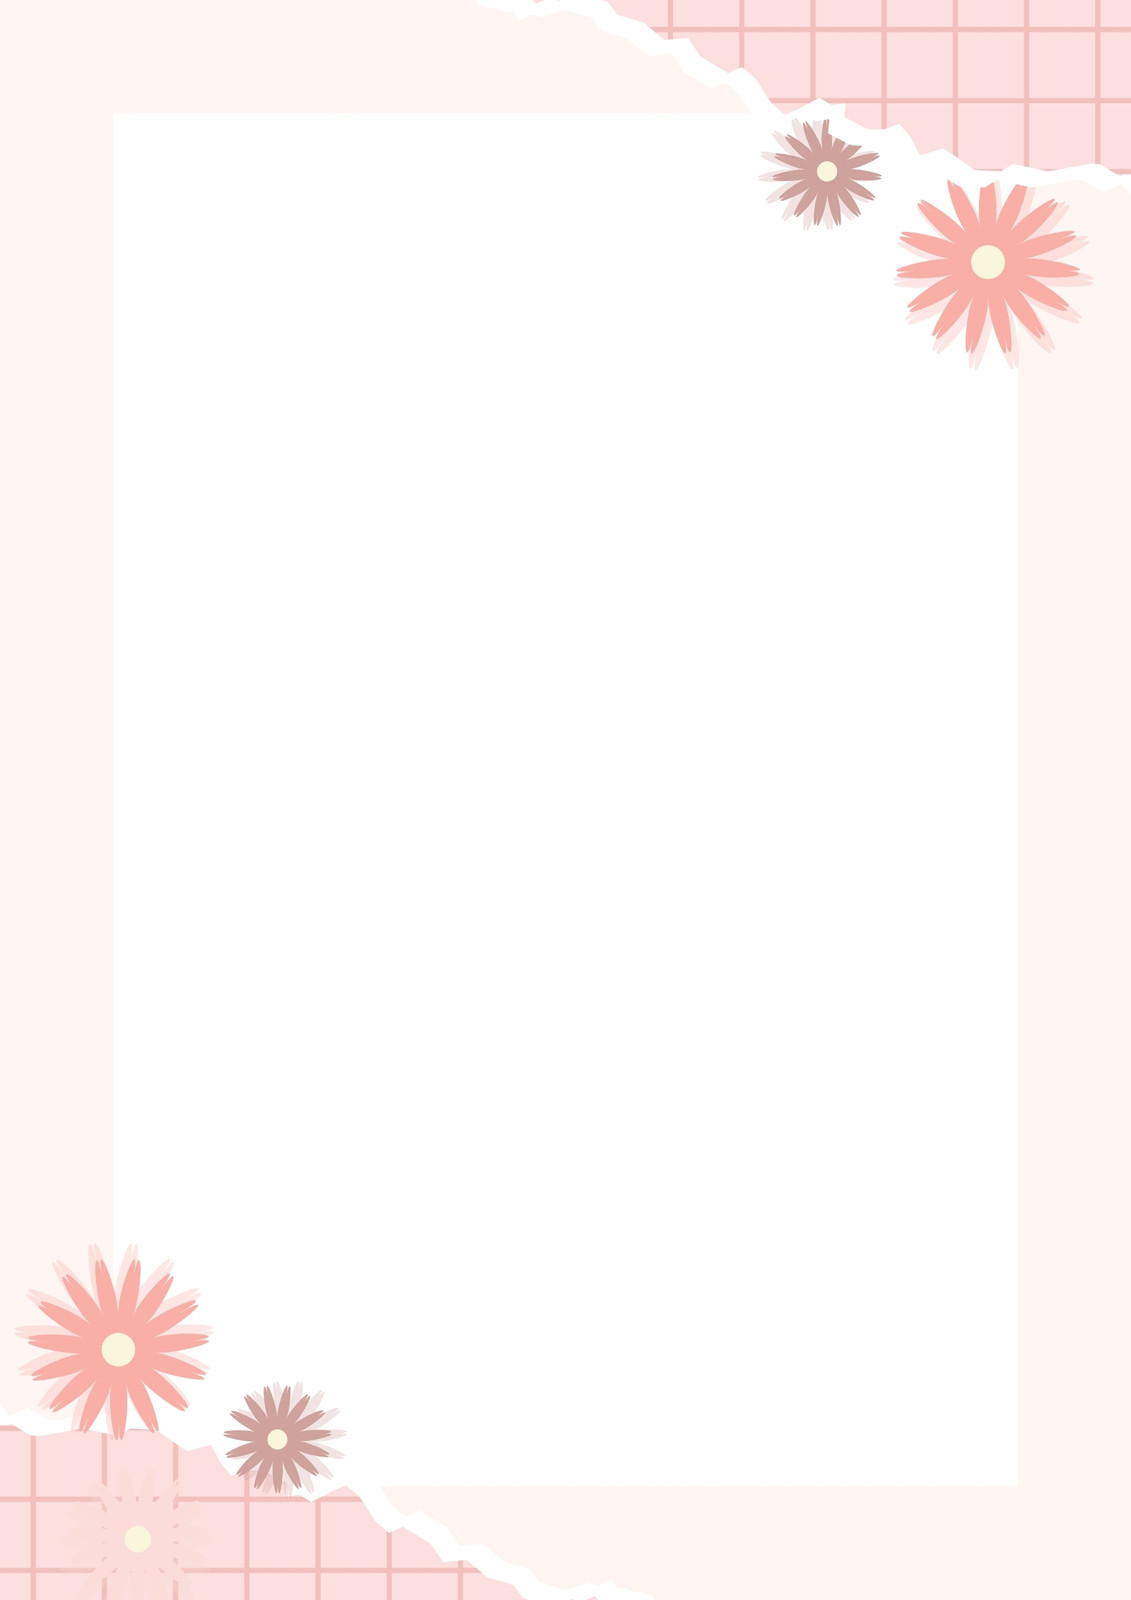 FREE! - Flower Easy Page Border for KS2, Page Borders